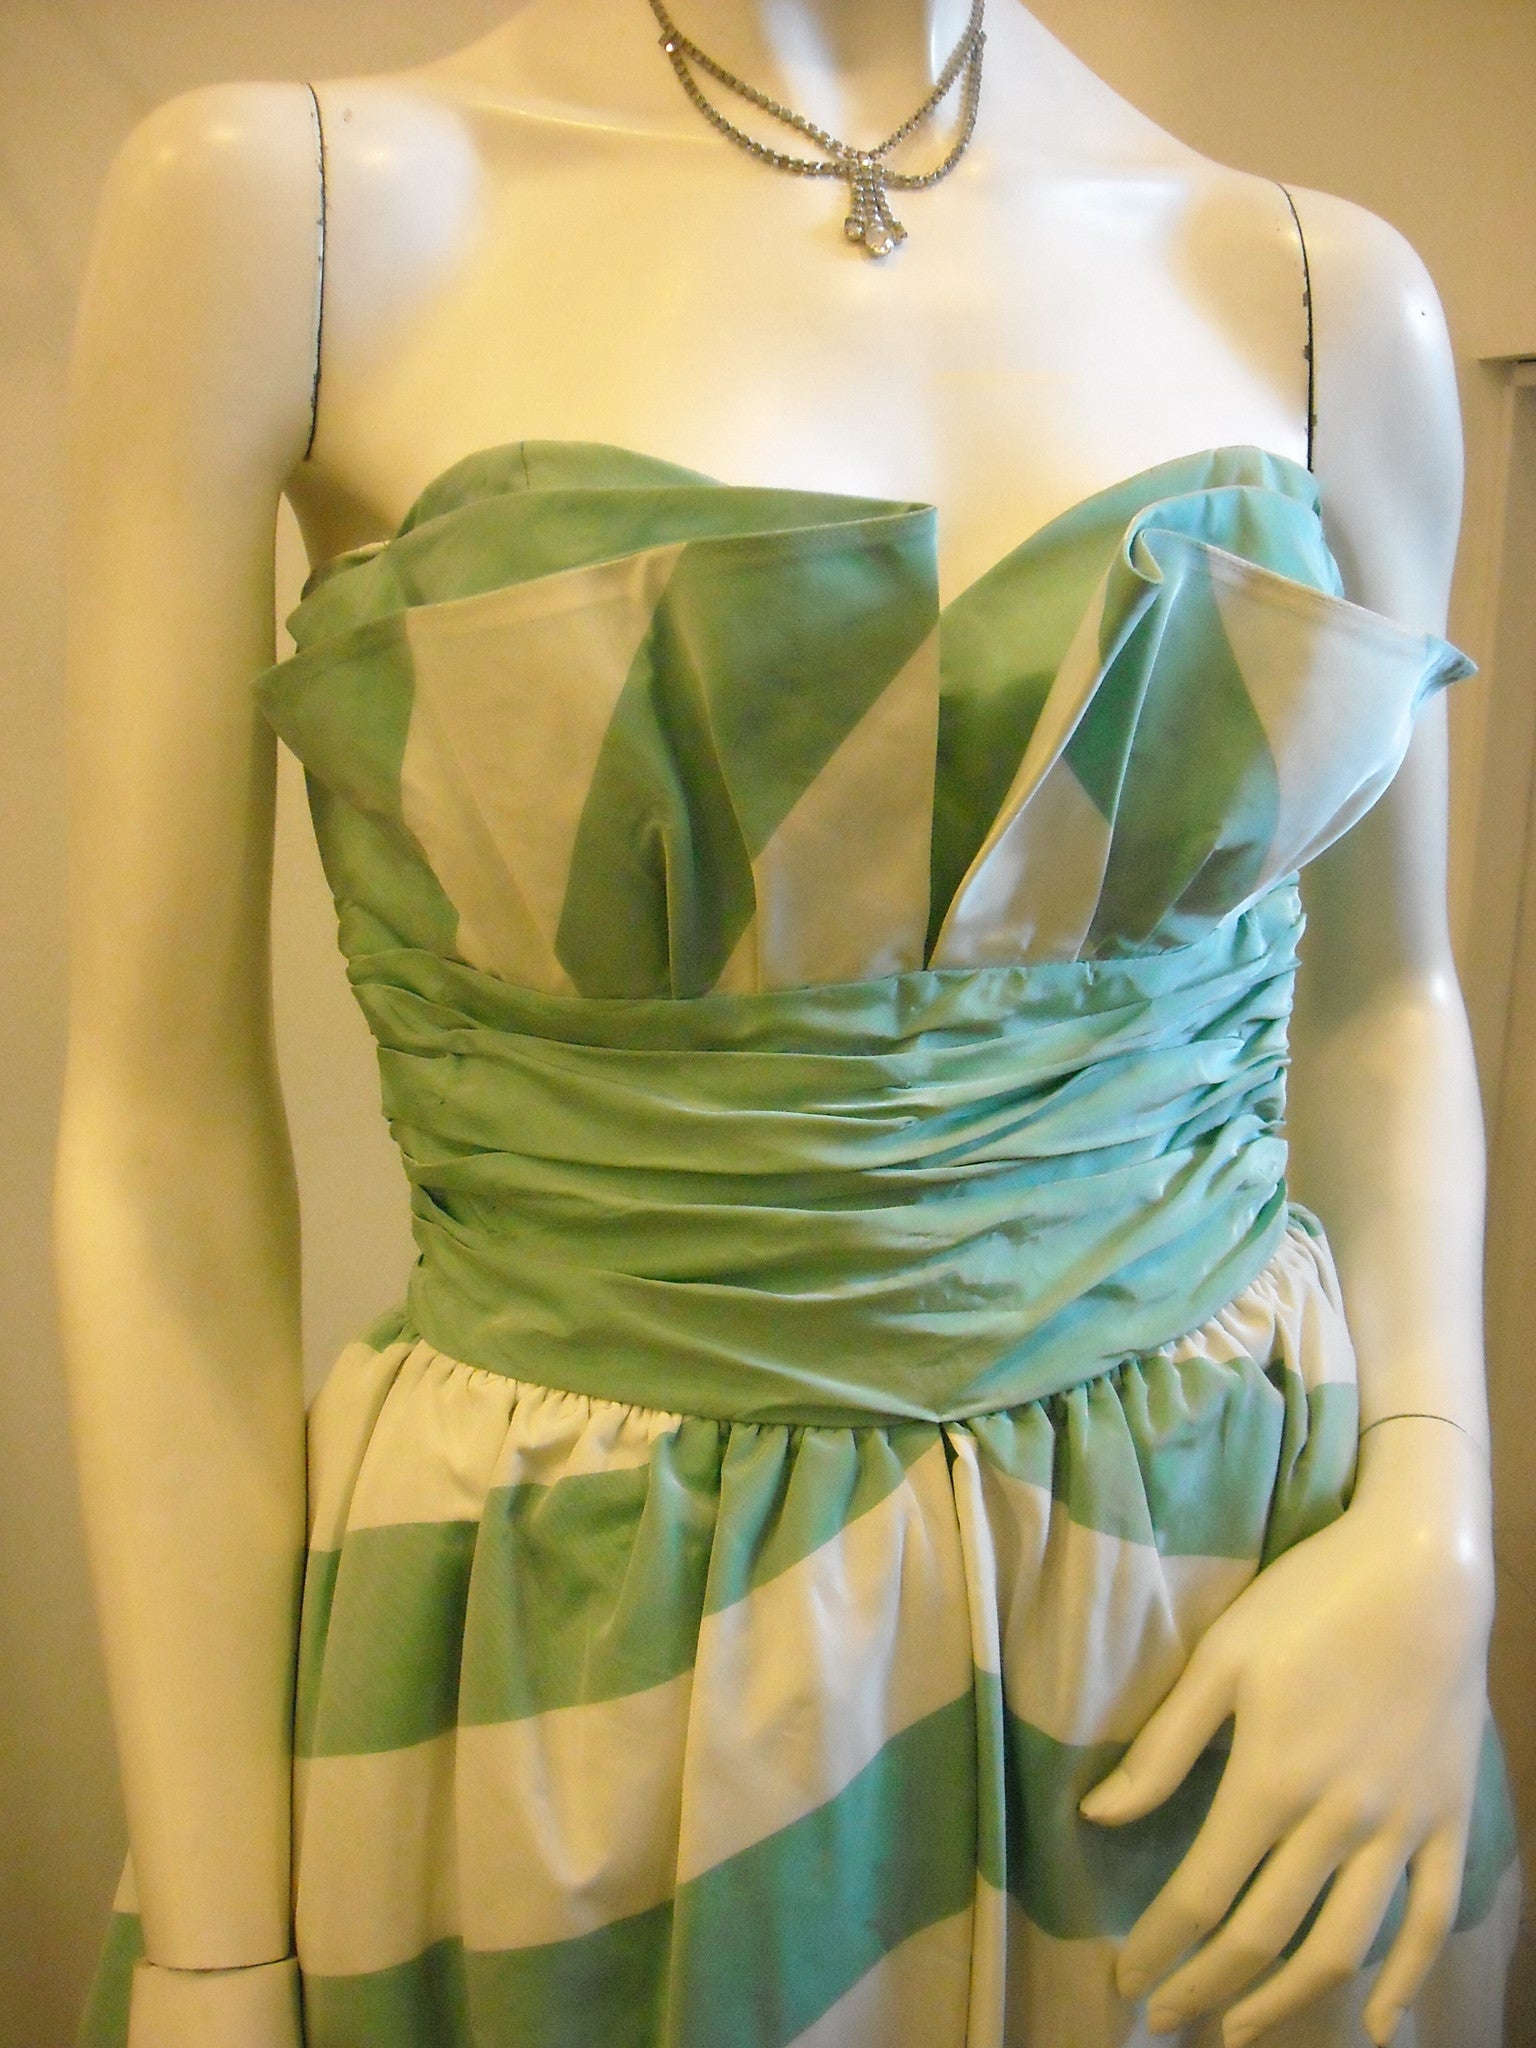 Making An Entrance with Green Stripes Vintage Evening Dress